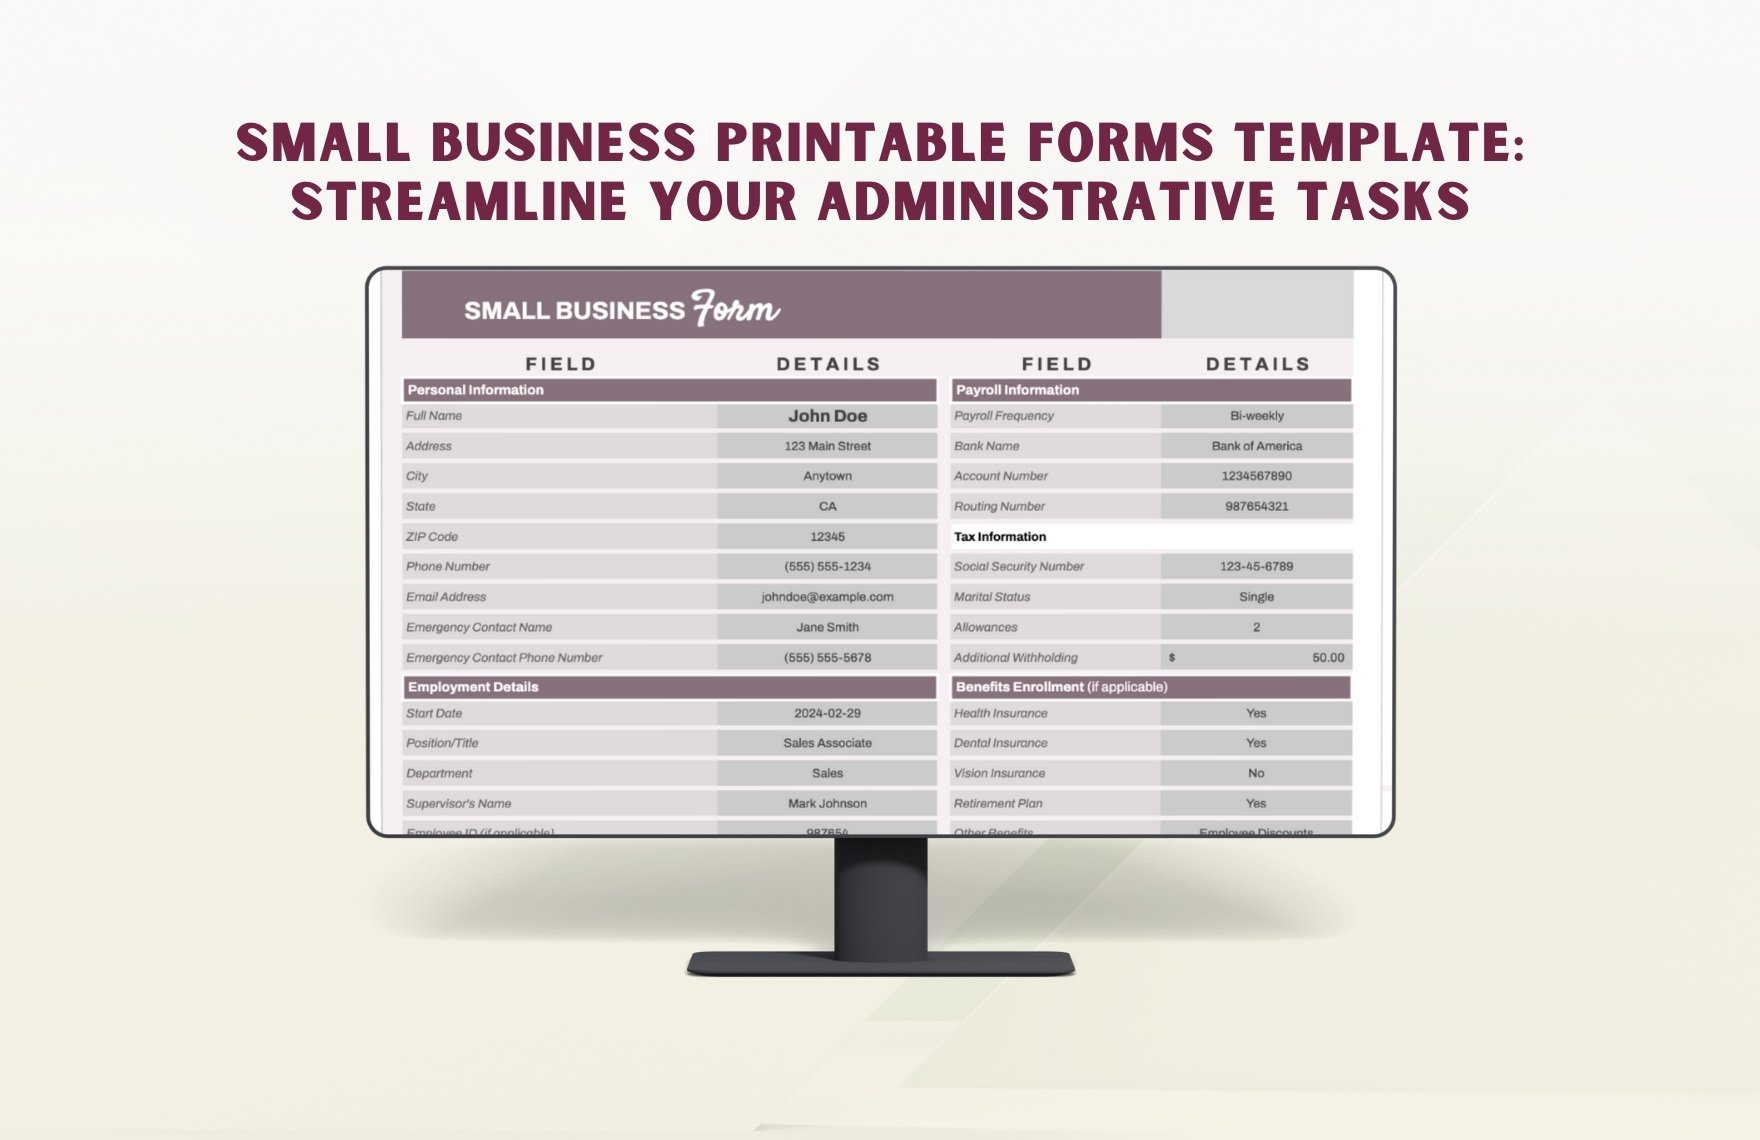 Small Business Printable Forms Template